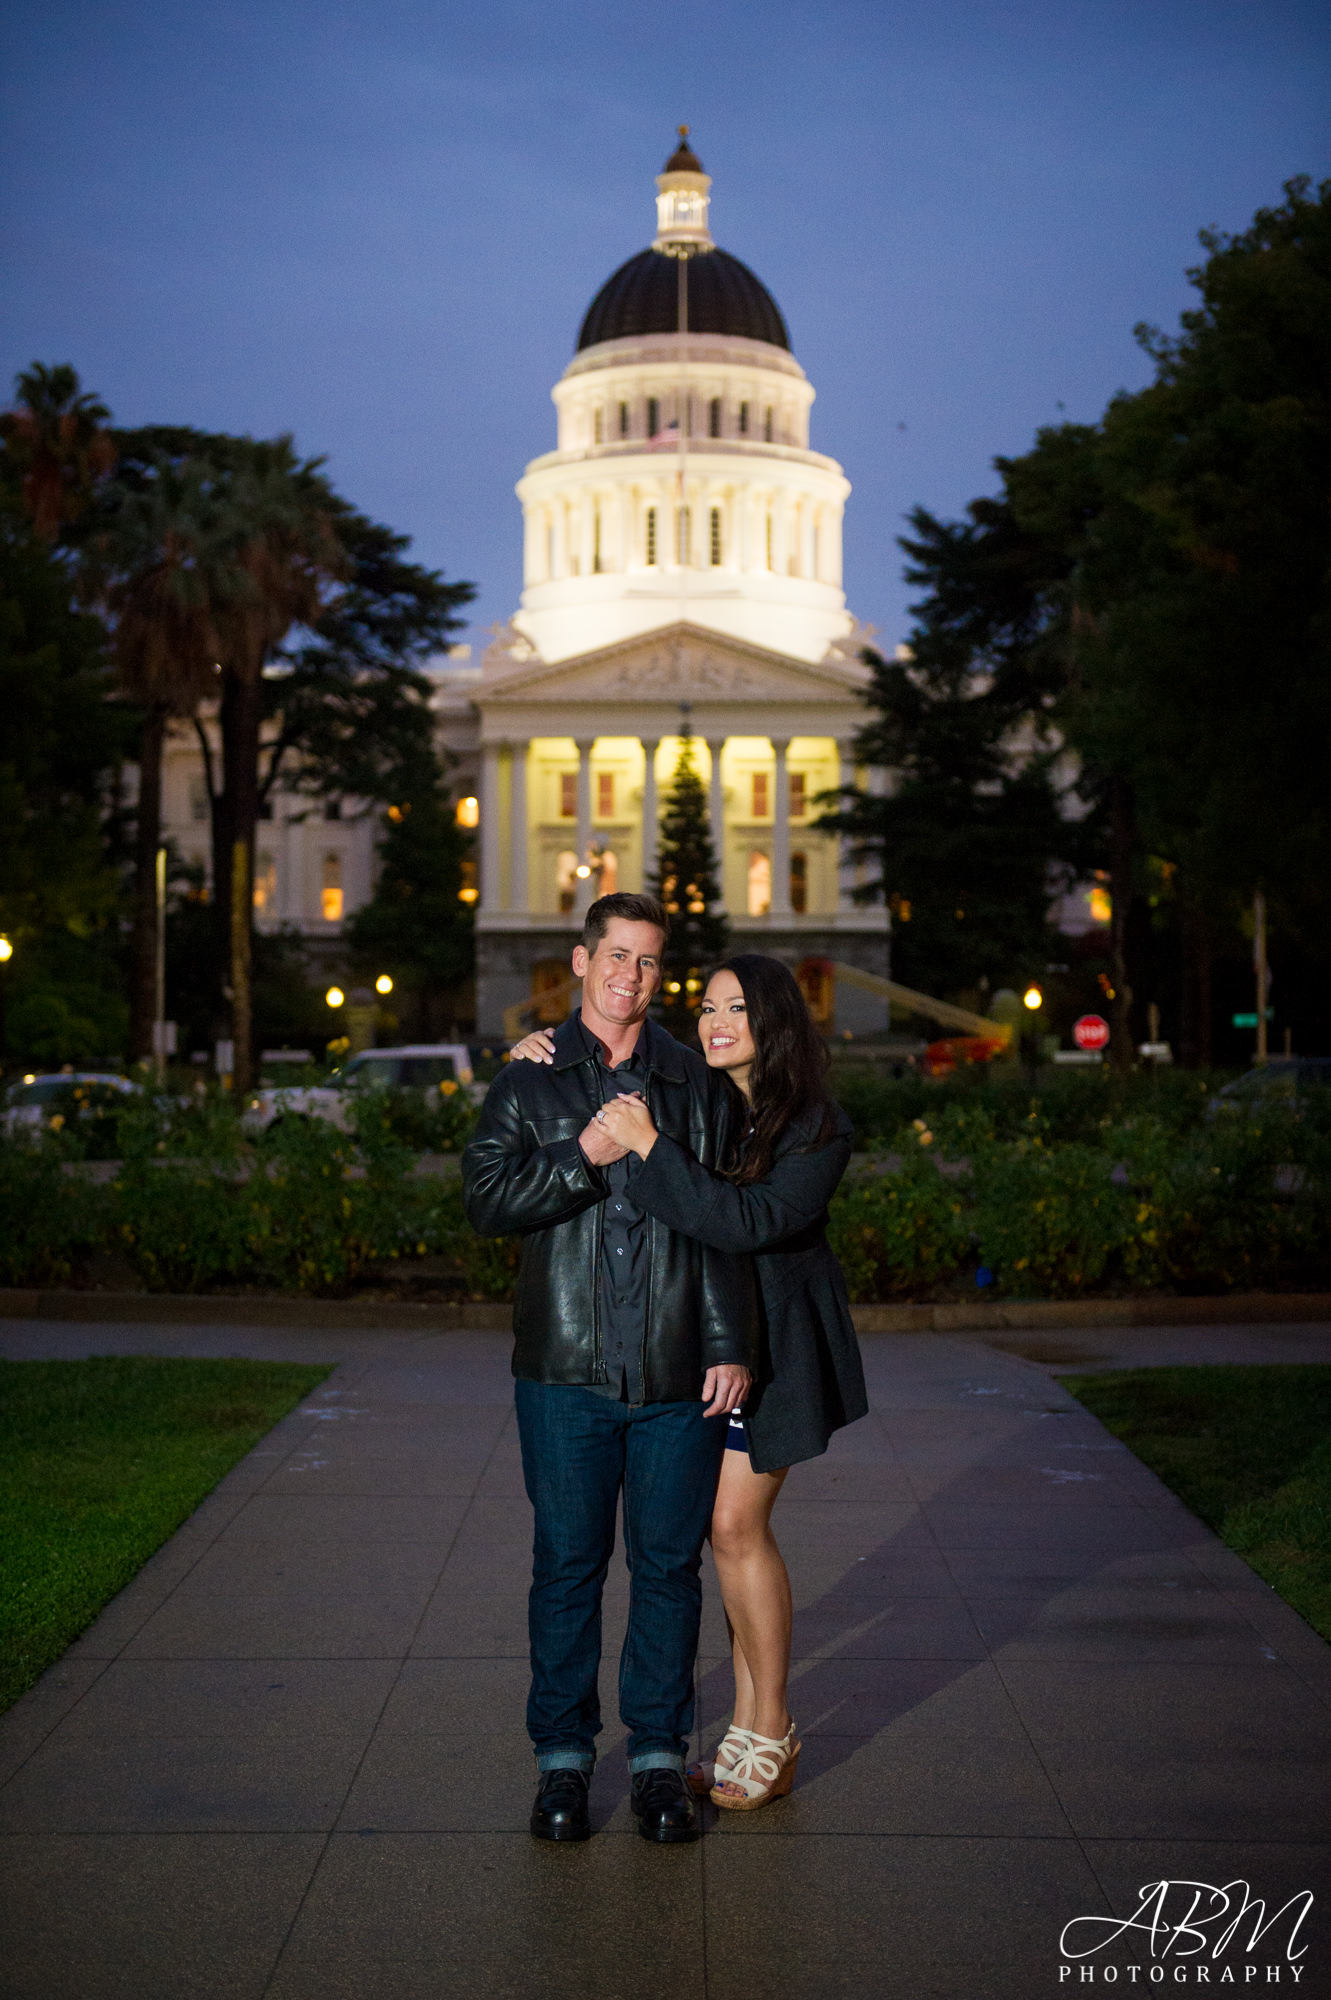 sacromento-fire-station-engagement-san-diego-wedding-photography-0014-1 Fire Station 5 | State Capital | Sacramento | Chalyn + Jen’s Engagement Photography